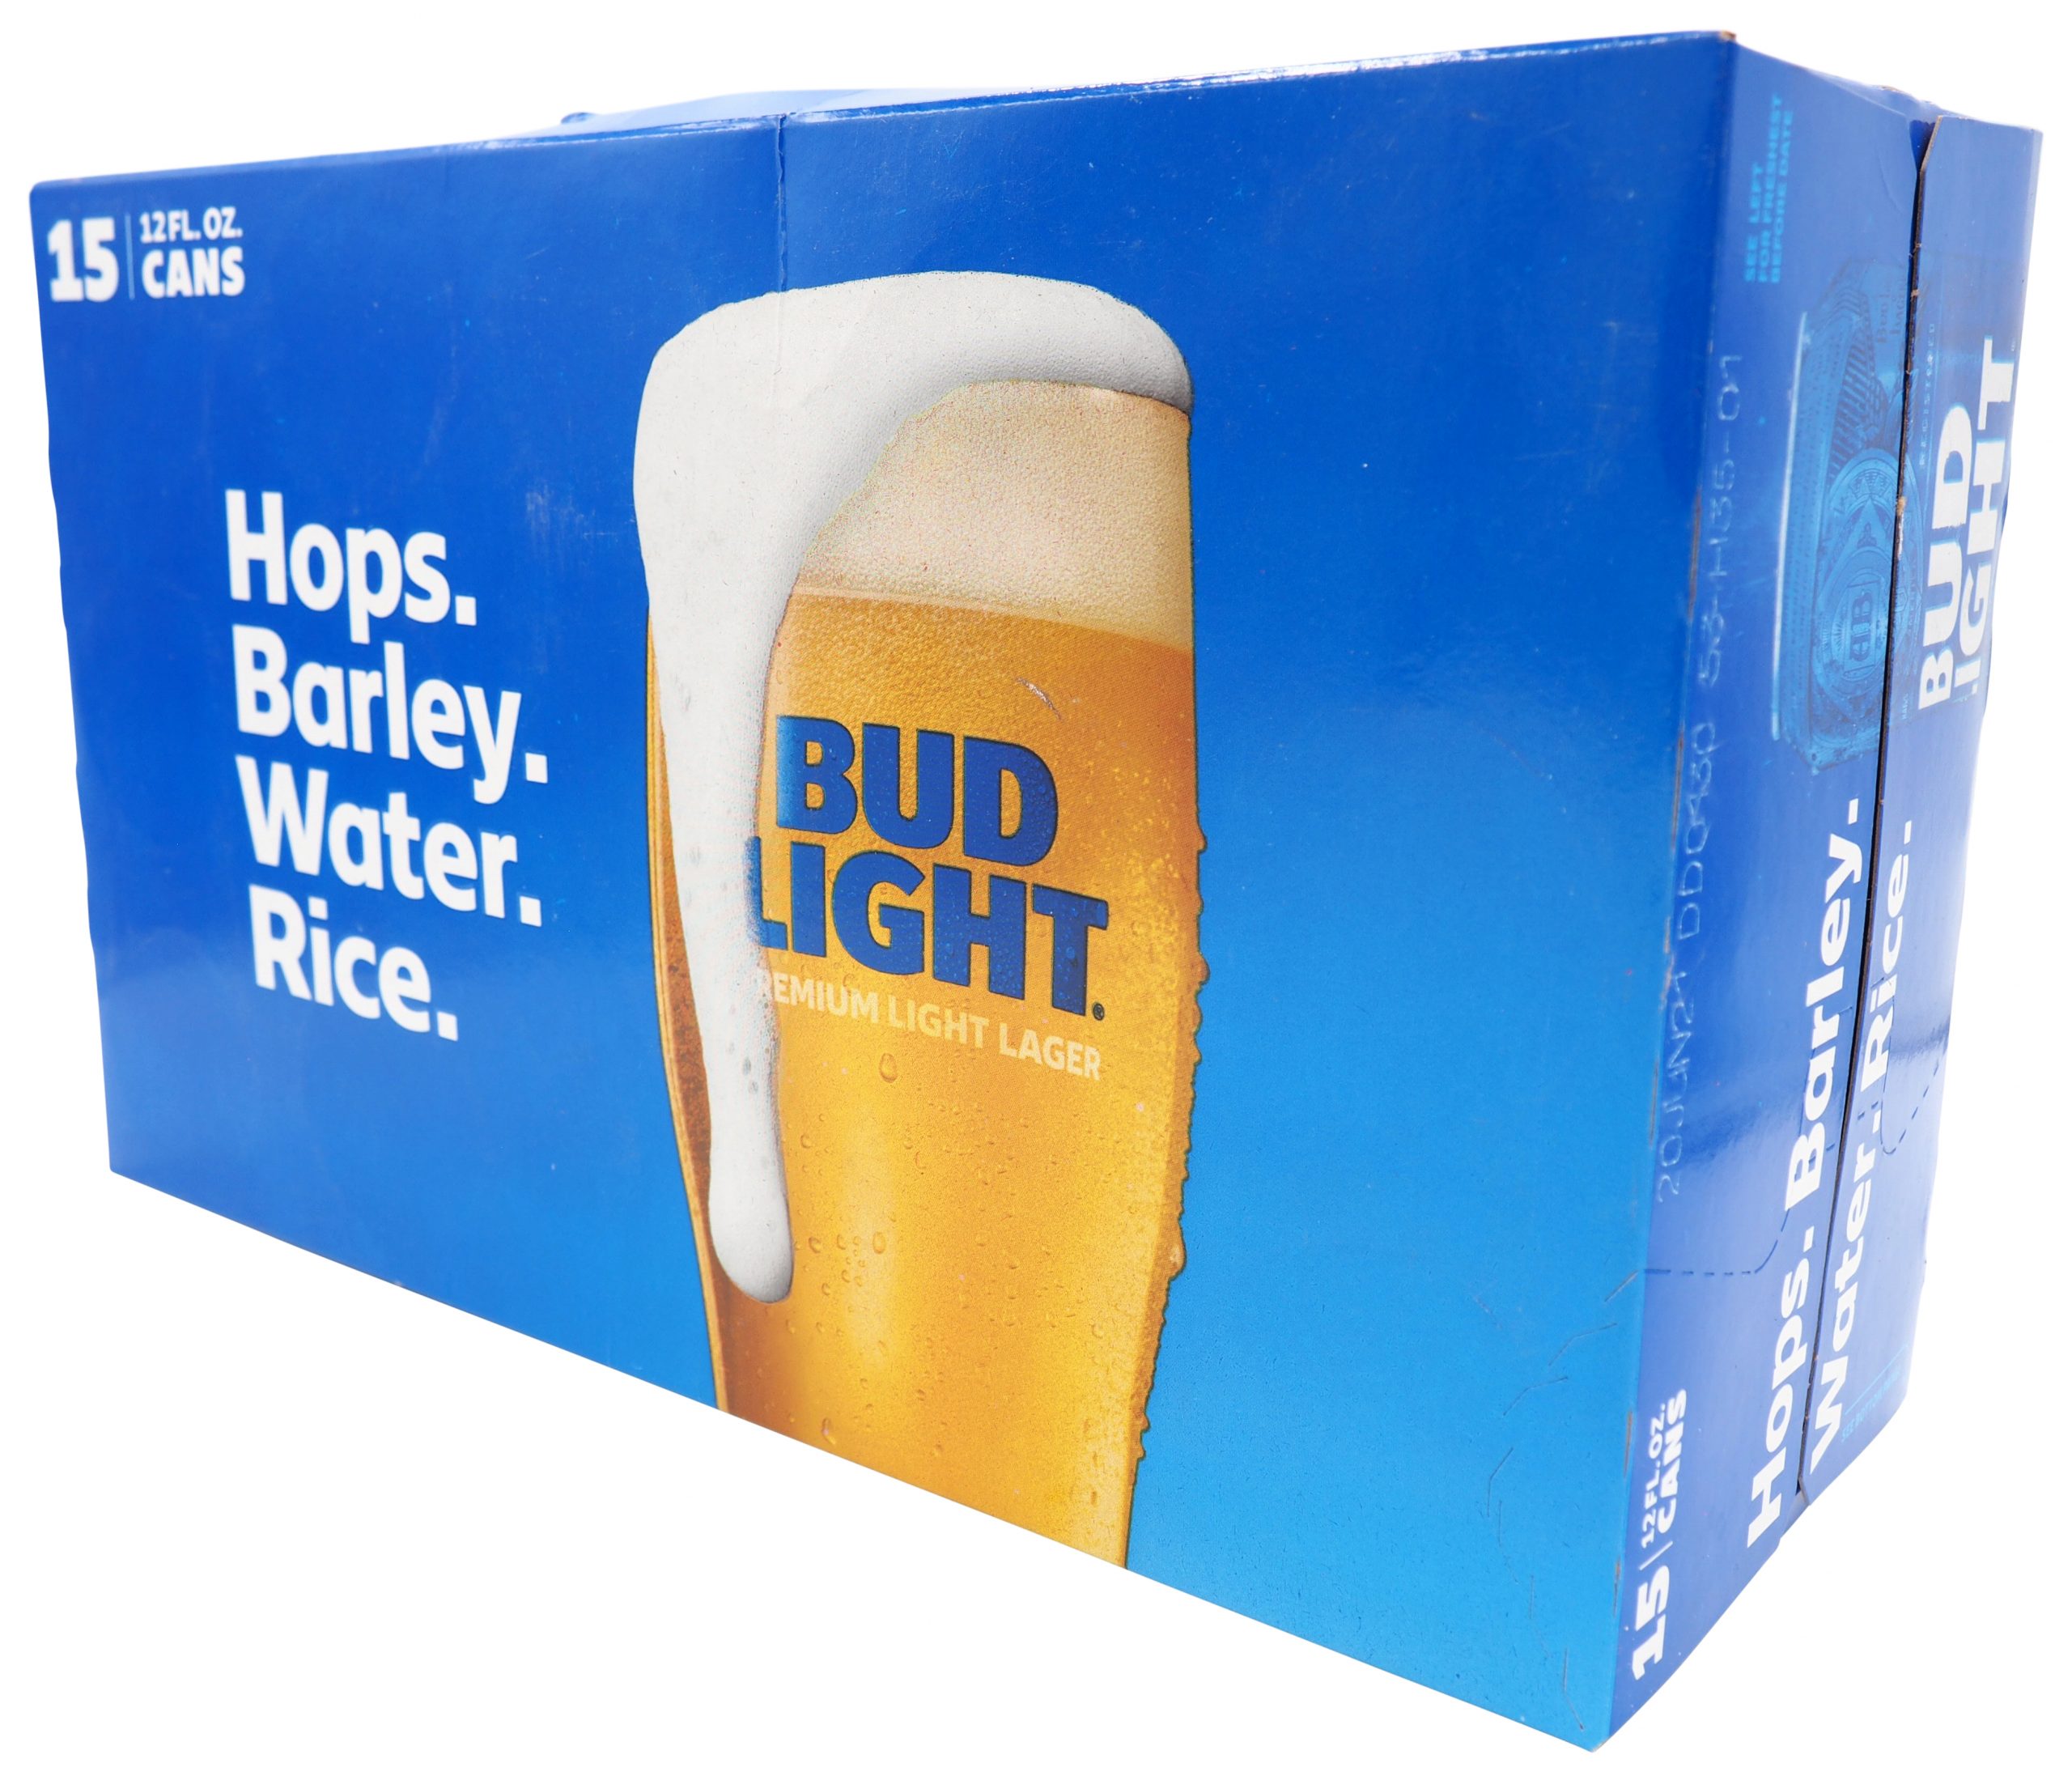 BUD LIGHT 12 PACK CAN